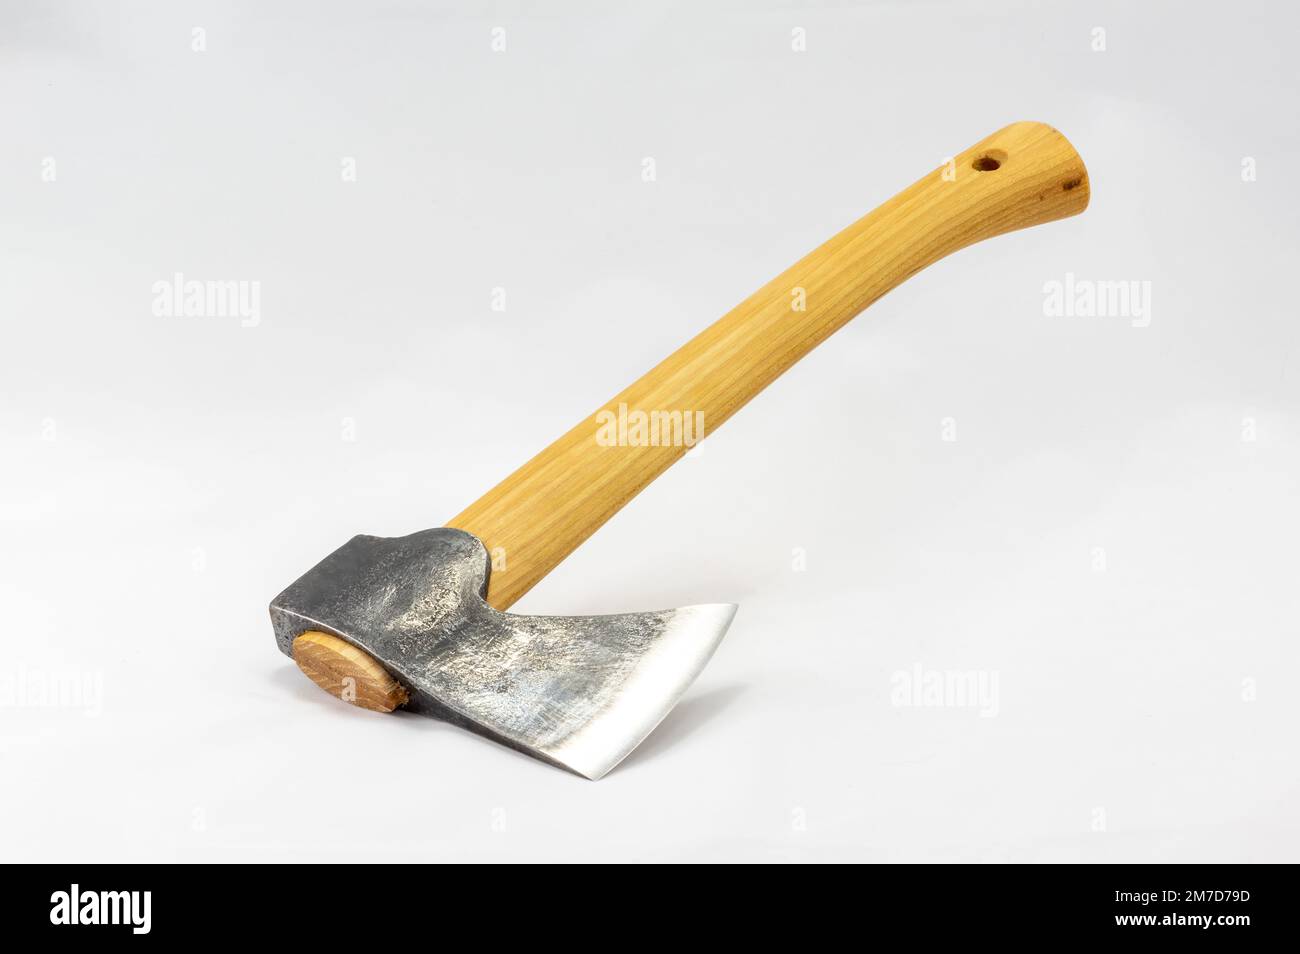 Carpenter Tools Axe, Hammer and Chisels Stock Photo by ©Rostislavv 69313467